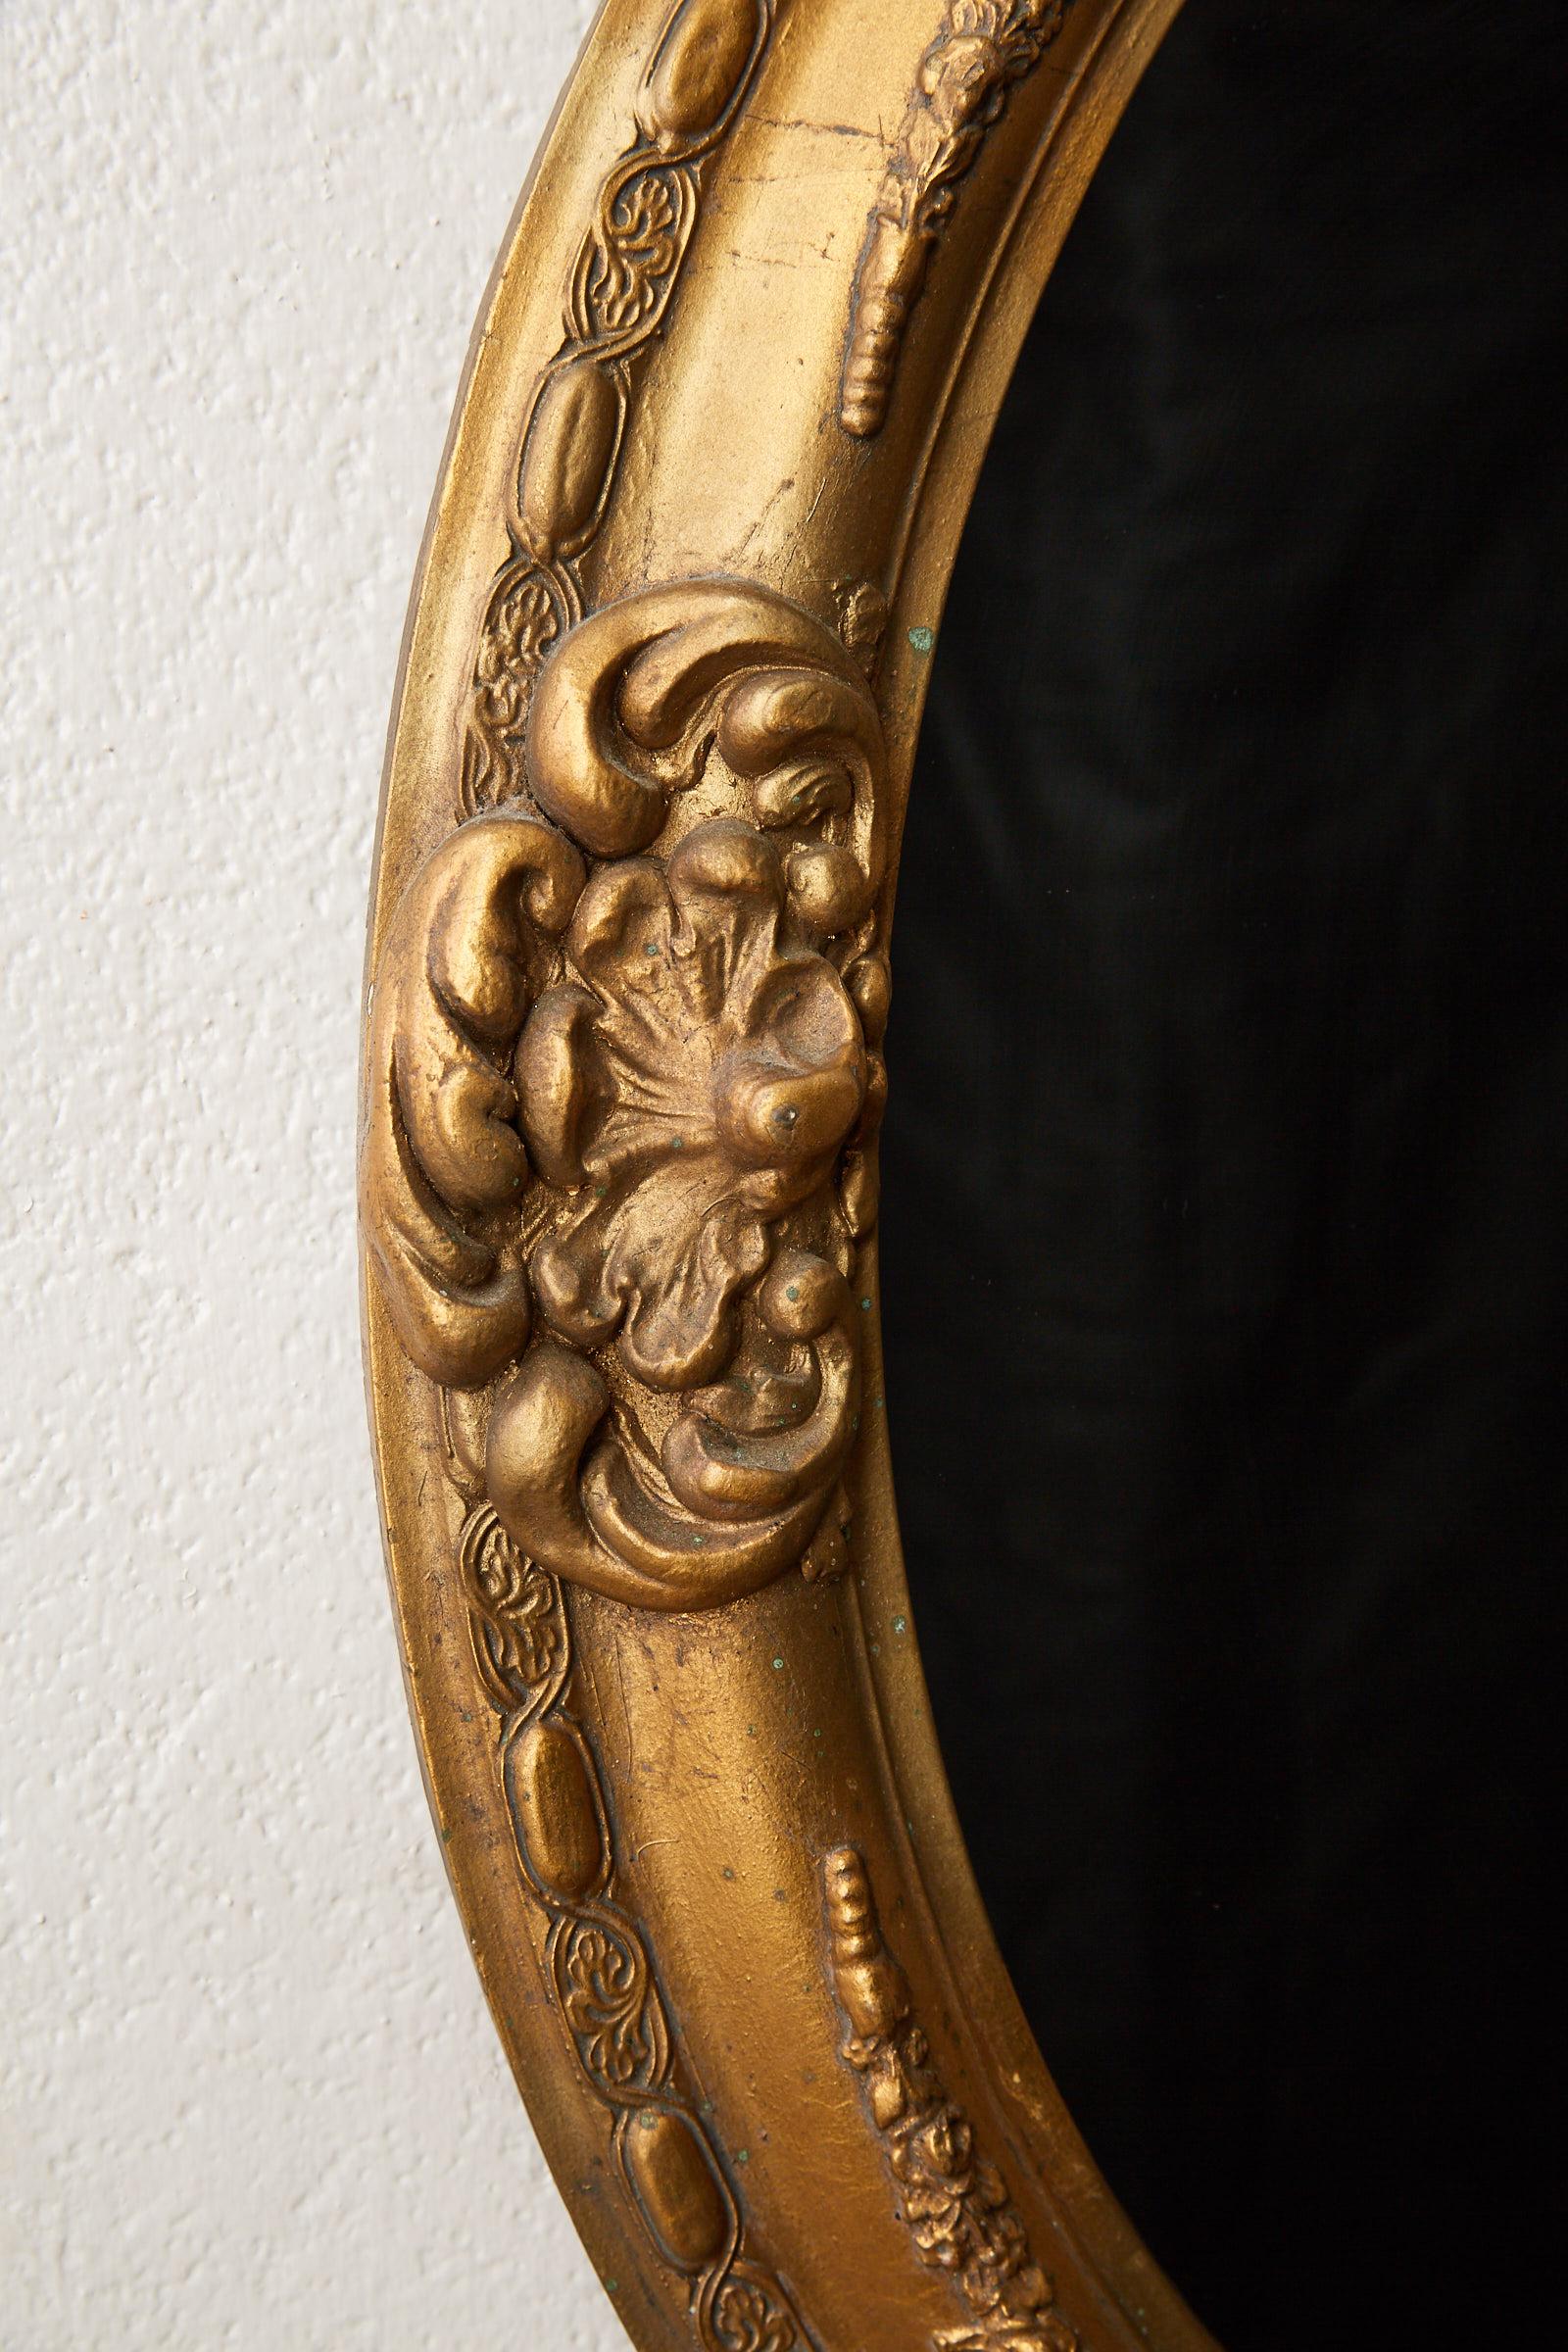 Early 20th century Italian Florentine oval gilt wall mirror with cartouches and details in the Rococo style.